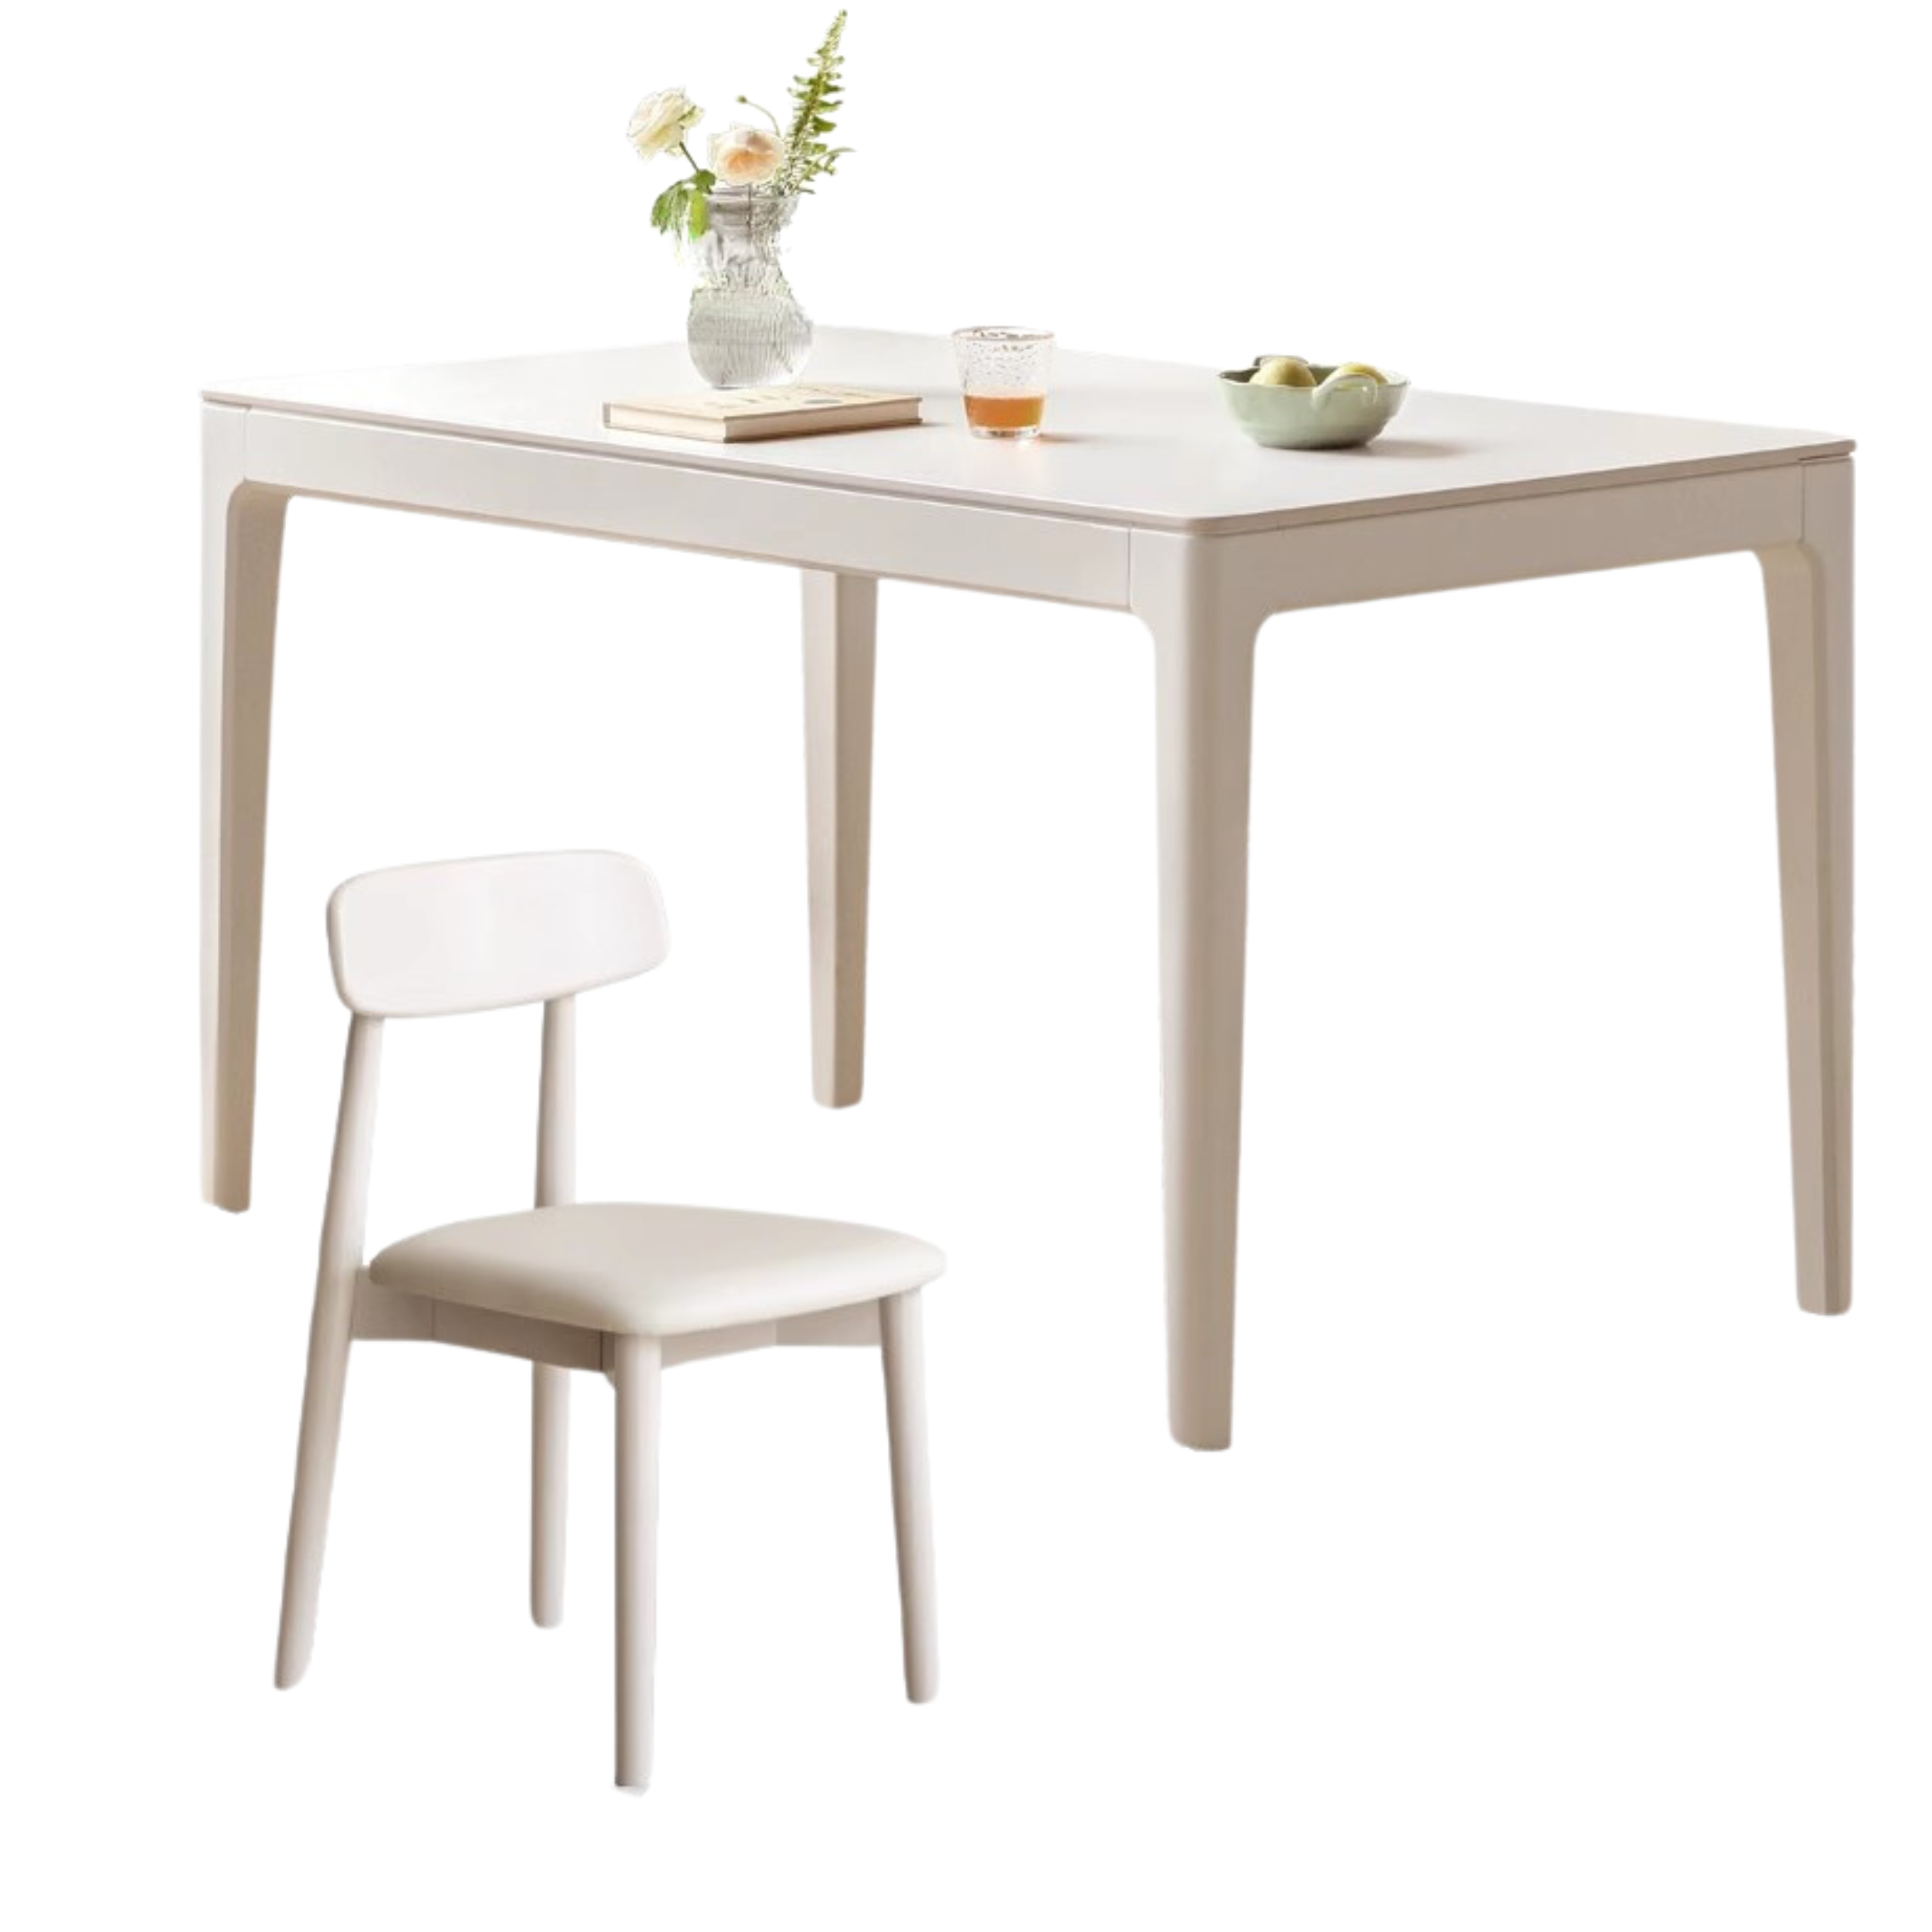 Birch Solid Wood Rock Plate Dining Table White Cream